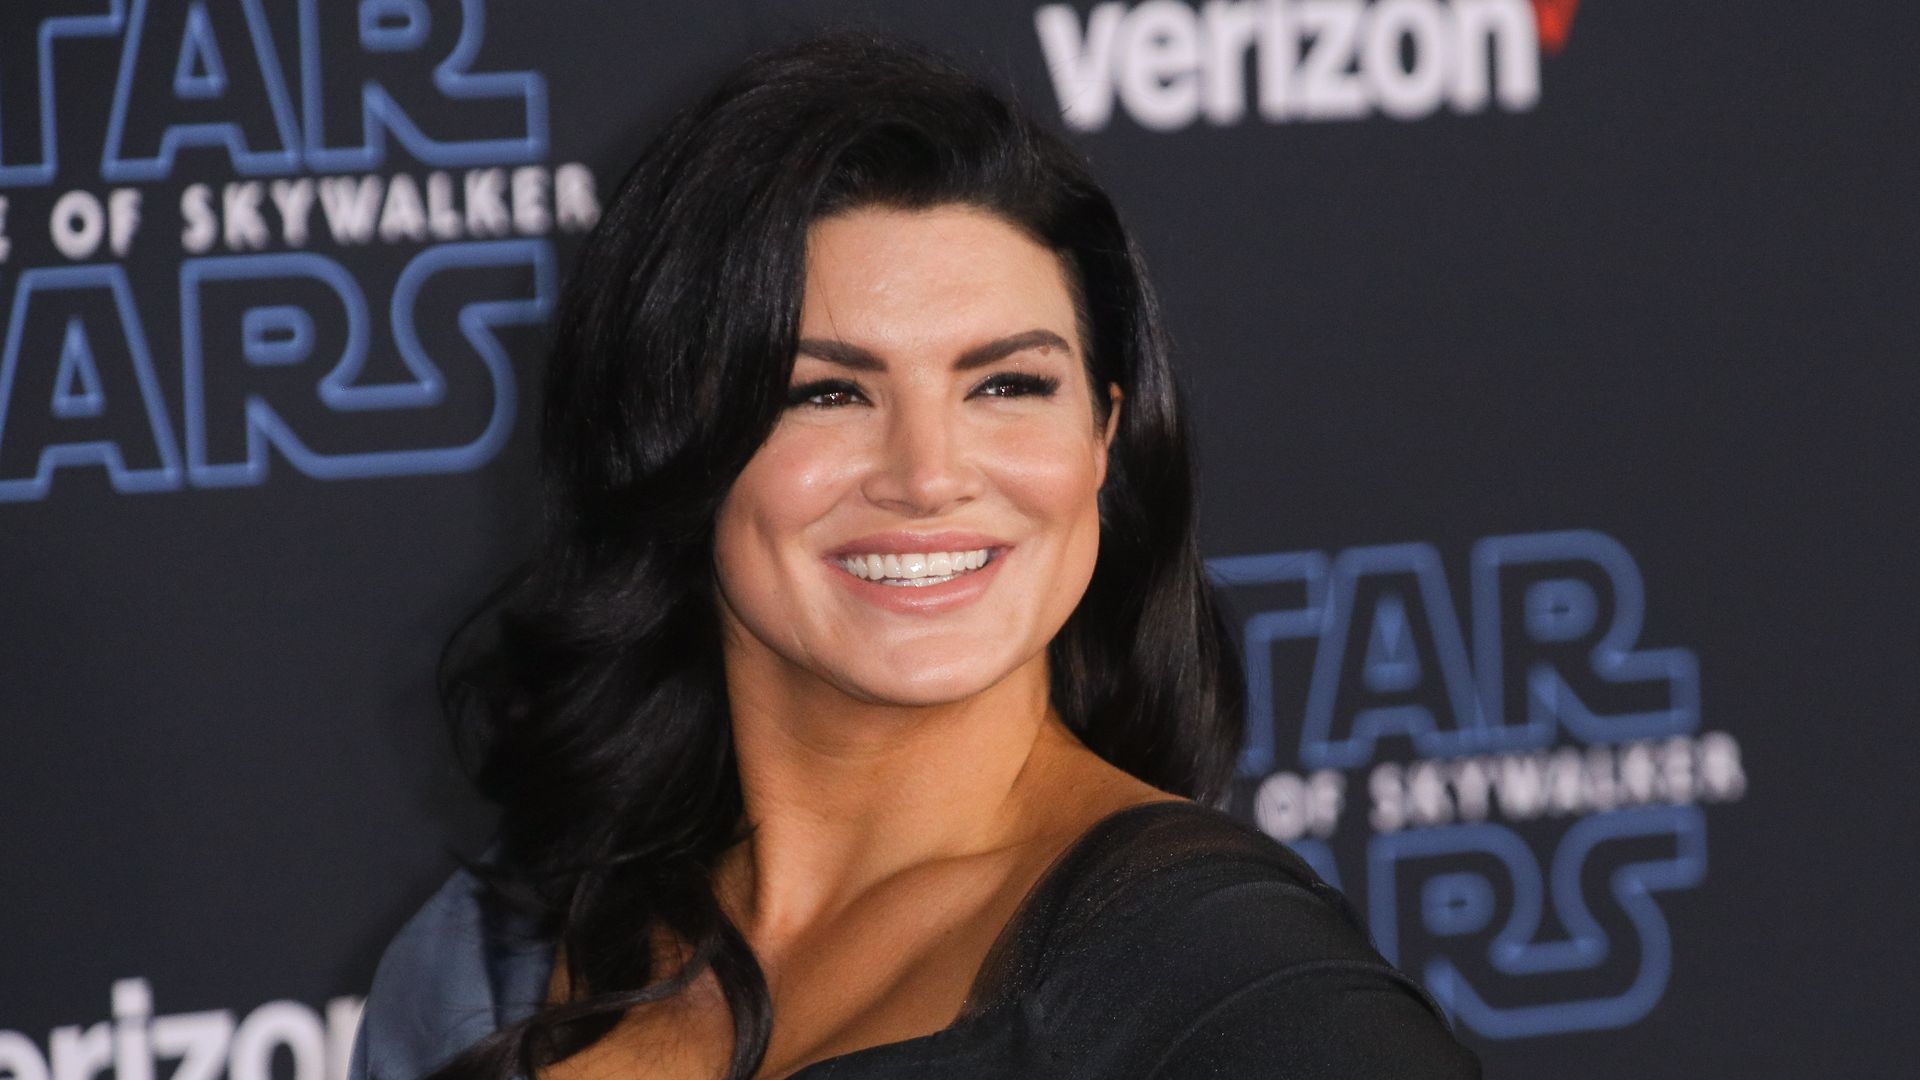 Gina Carano at Lucasfilm's "Star Wars: The Rise of Skywalker" World Premiere held at El Capitan Theater in Los Angeles, CA, December 16, 2019